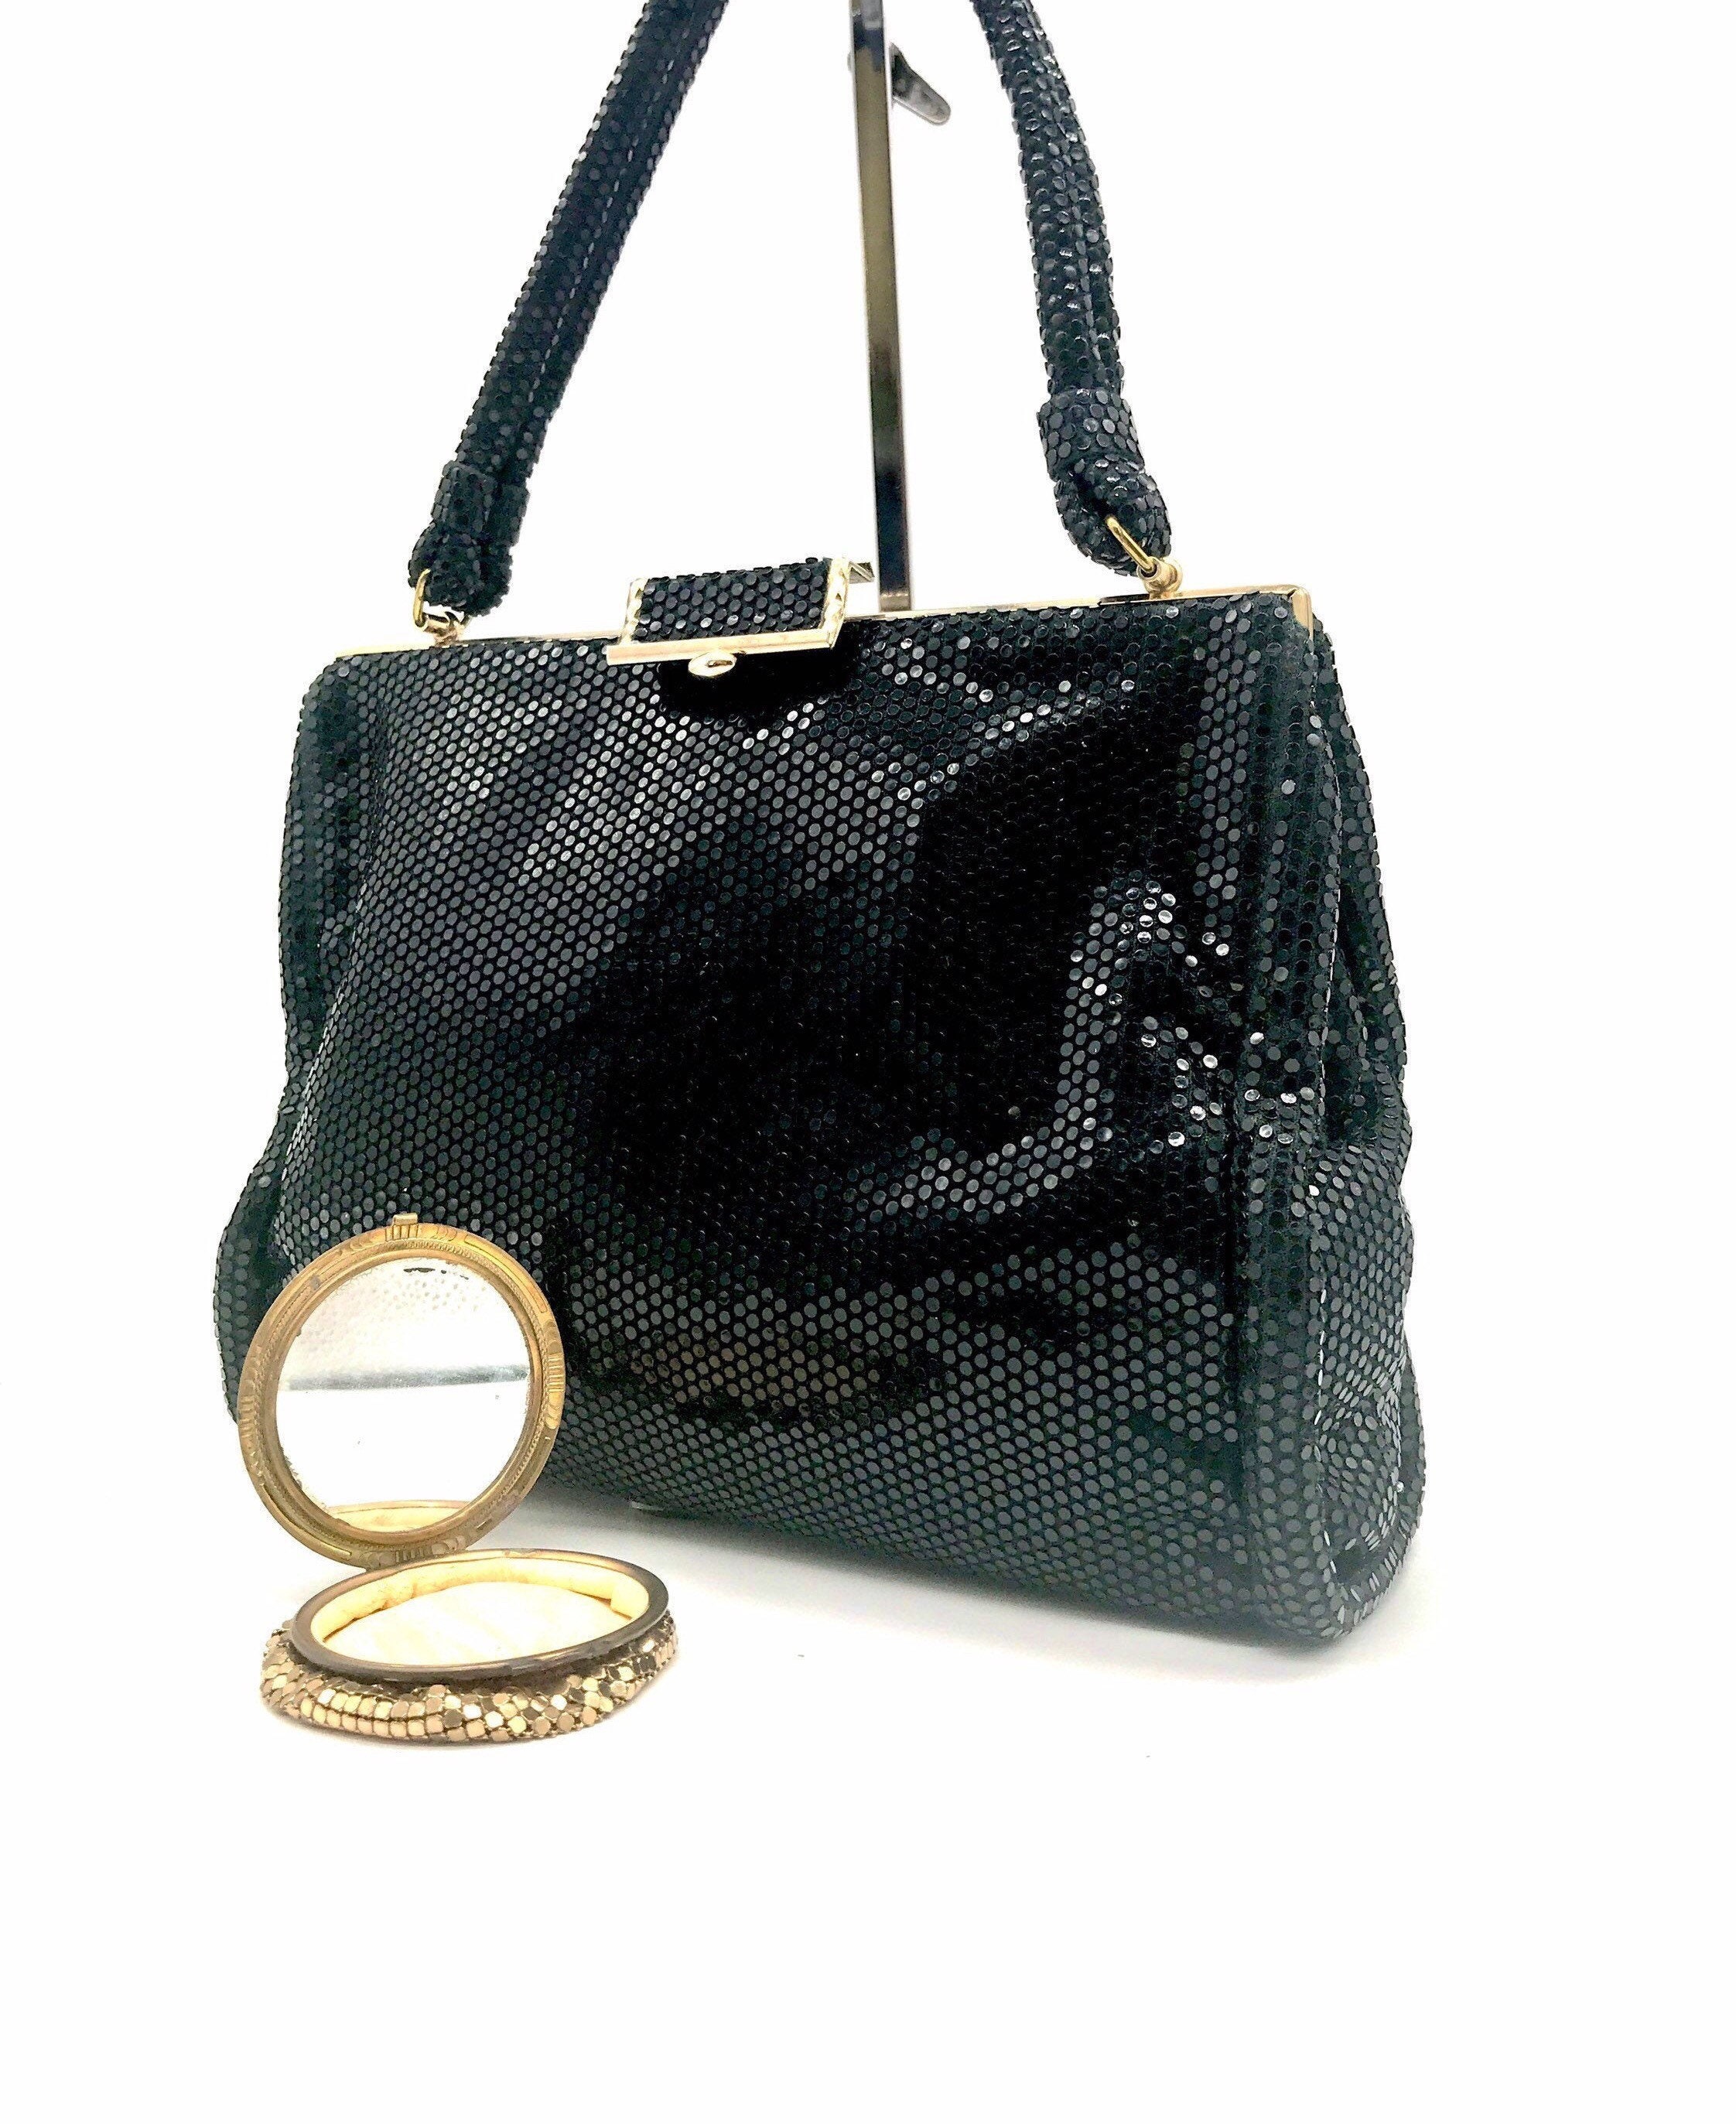 * VINTAGE '60s / '70s GLAMOROUS HAND MADE SPARKLING BLACK BEAD & SEQUIN  EVENING BAG FROM HONG KONG